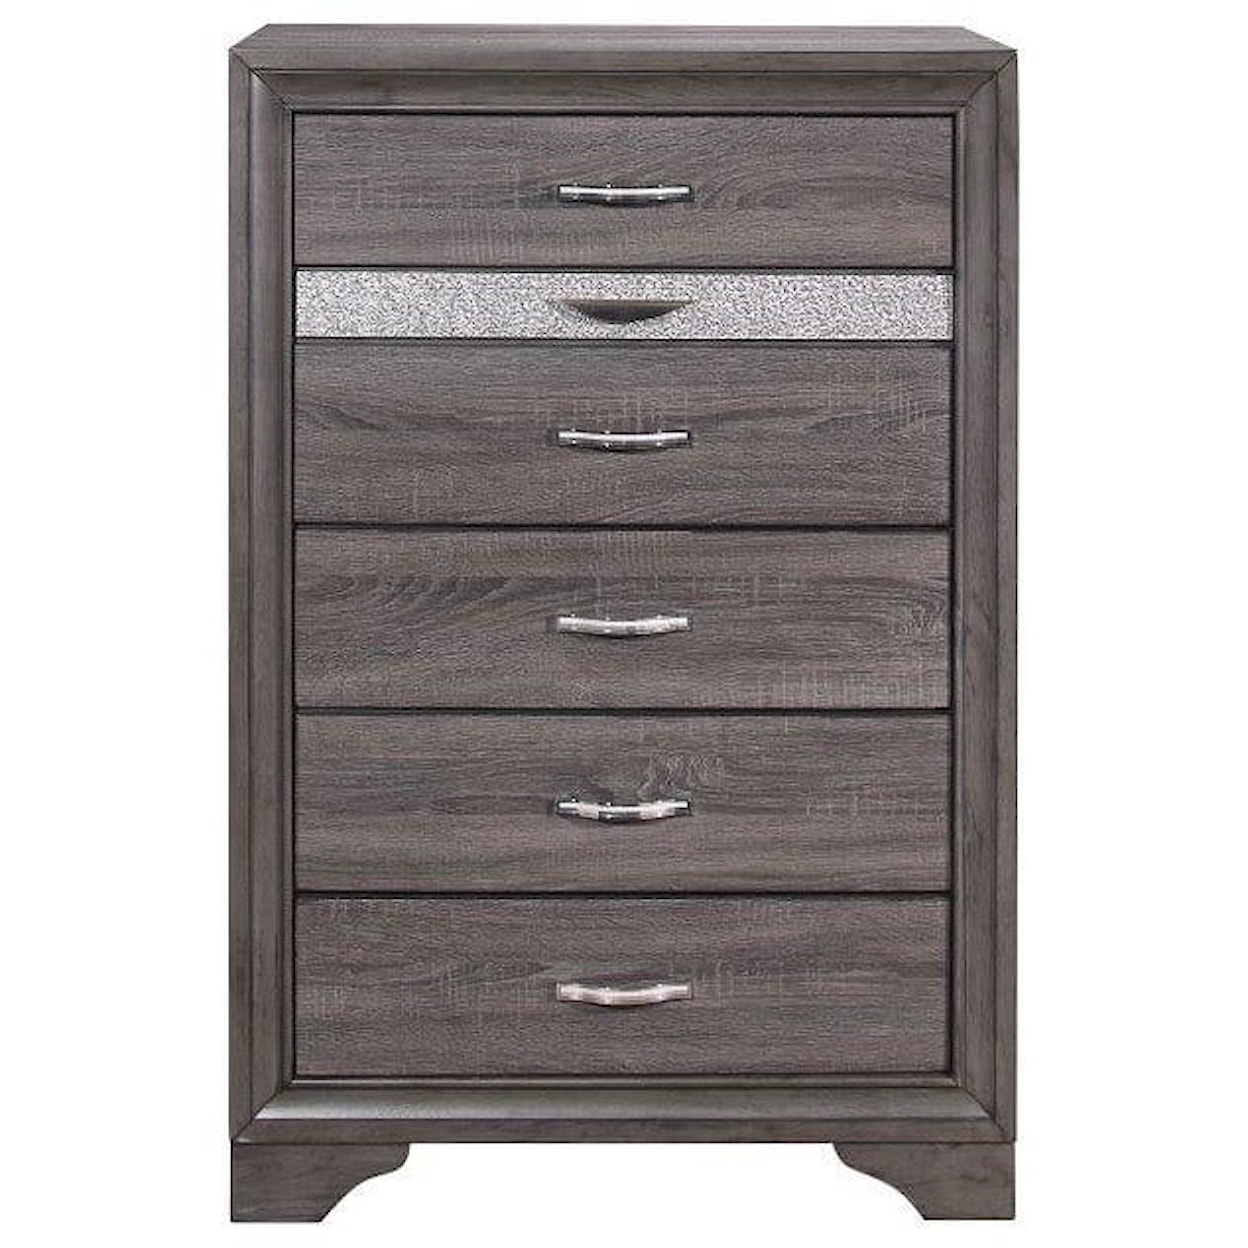 Global Furniture Seville Chest with Jewelry Drawer